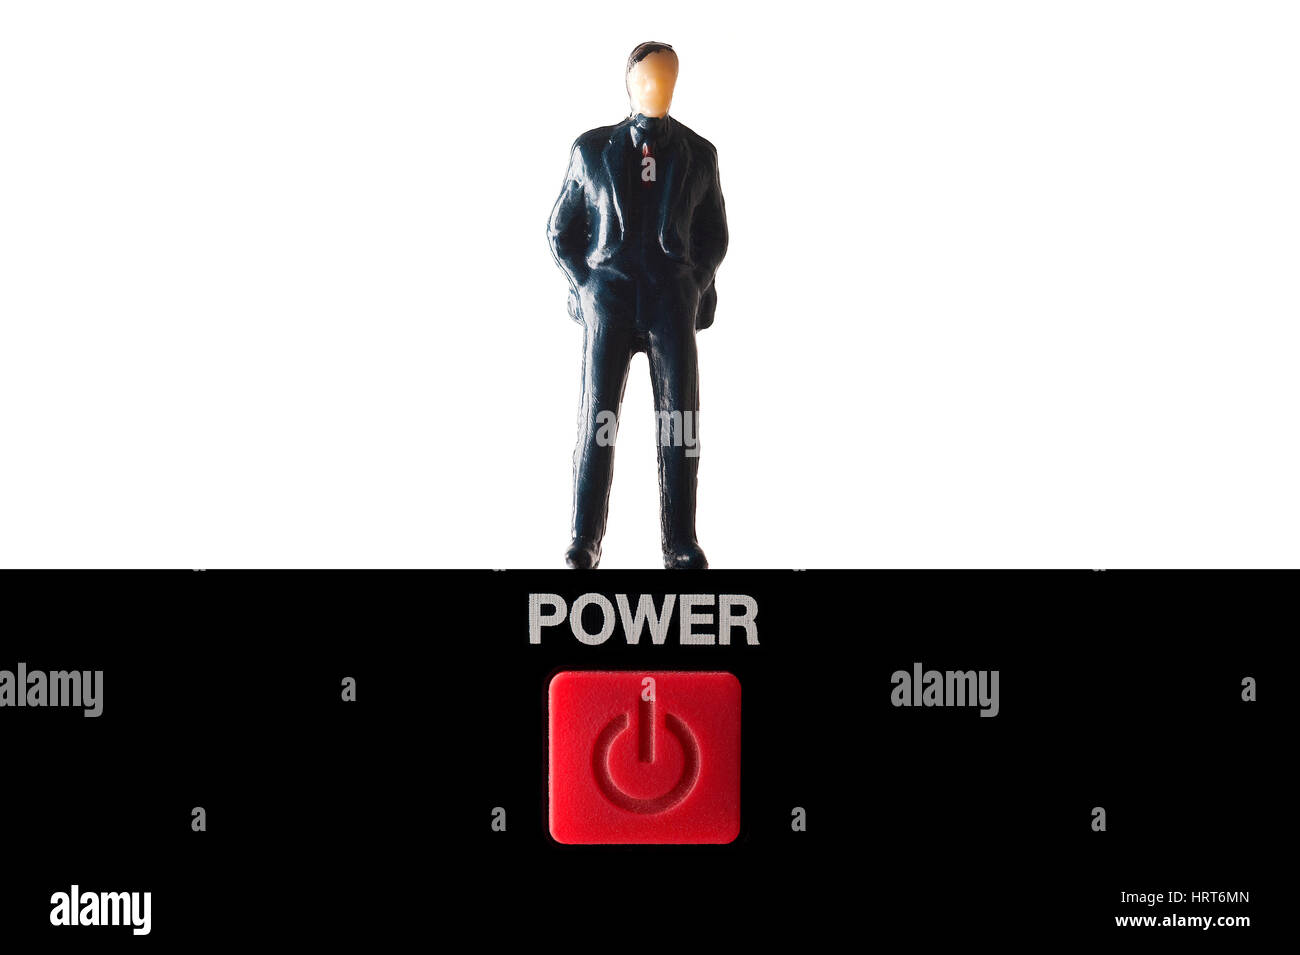 Miniature figure in suit standing on power button against white background Stock Photo